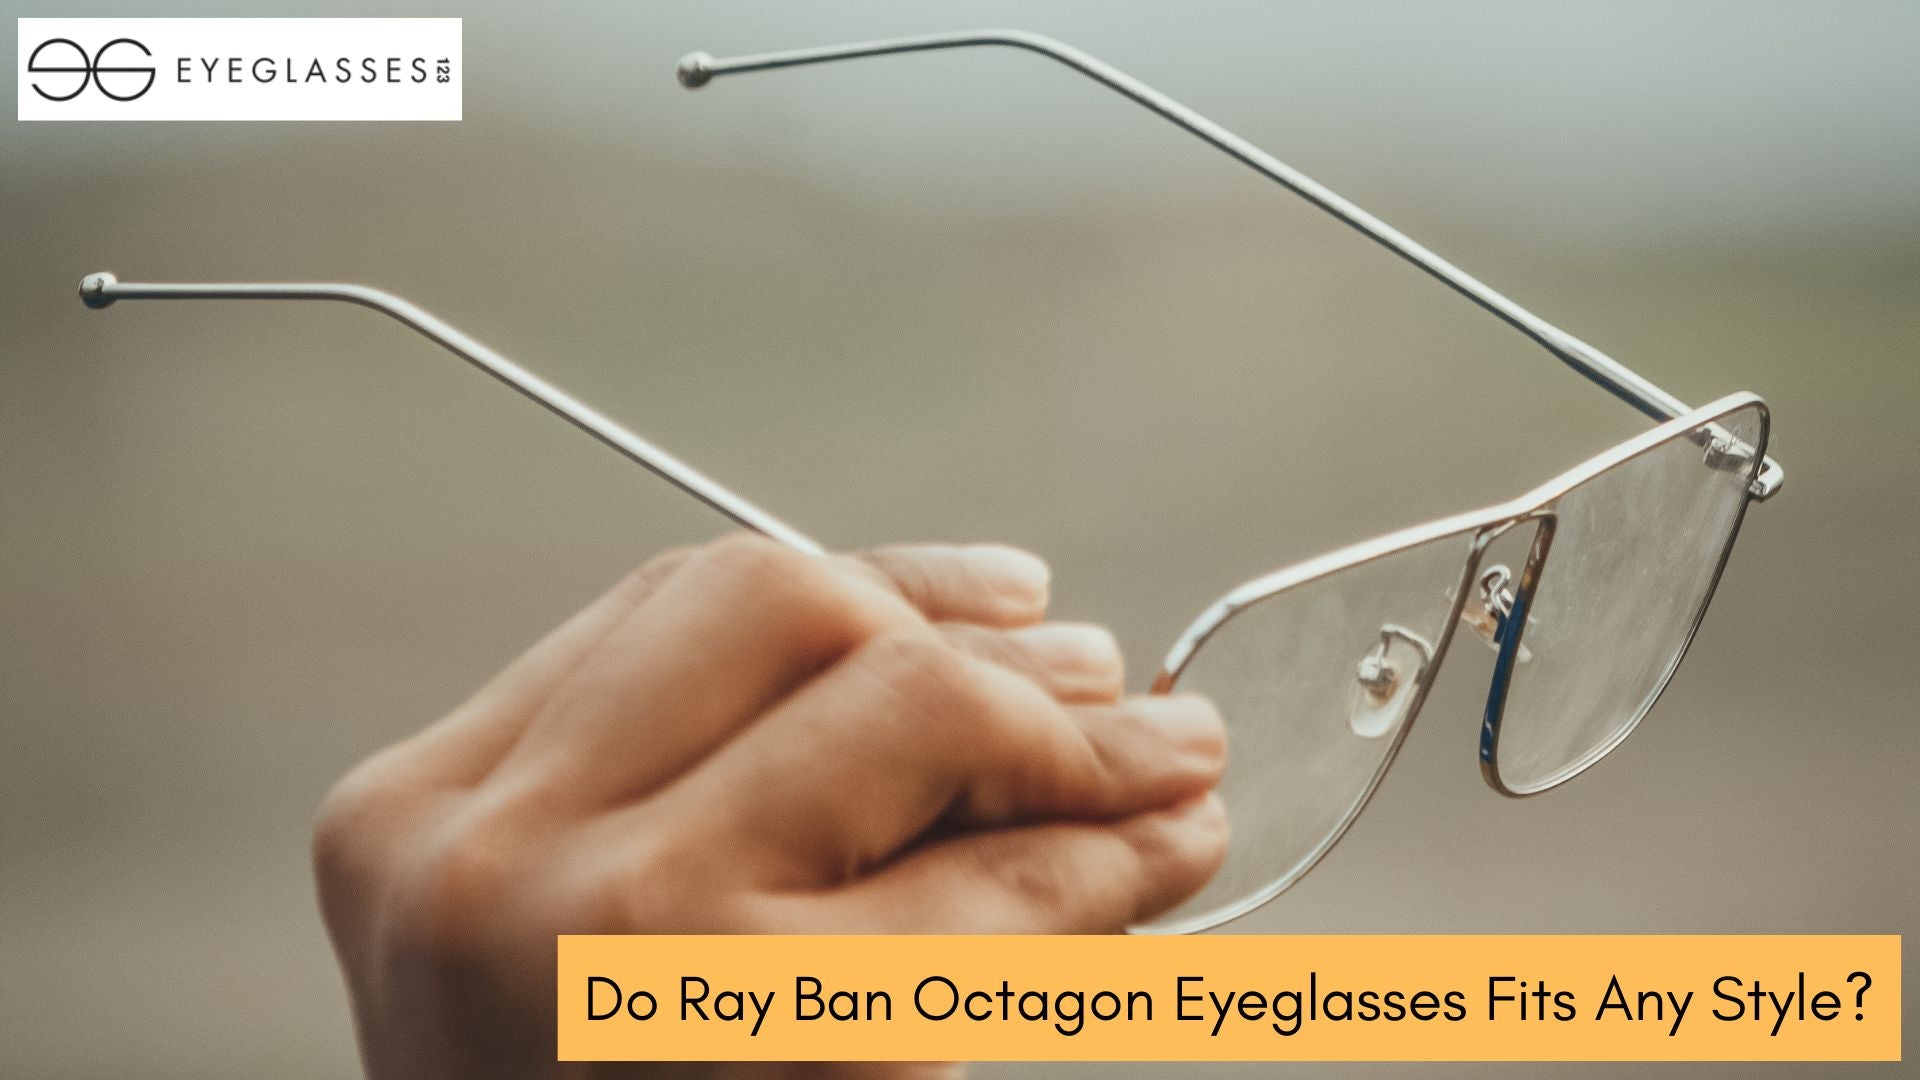 Do Ray Ban Octagon Eyeglasses Fits Any Style?